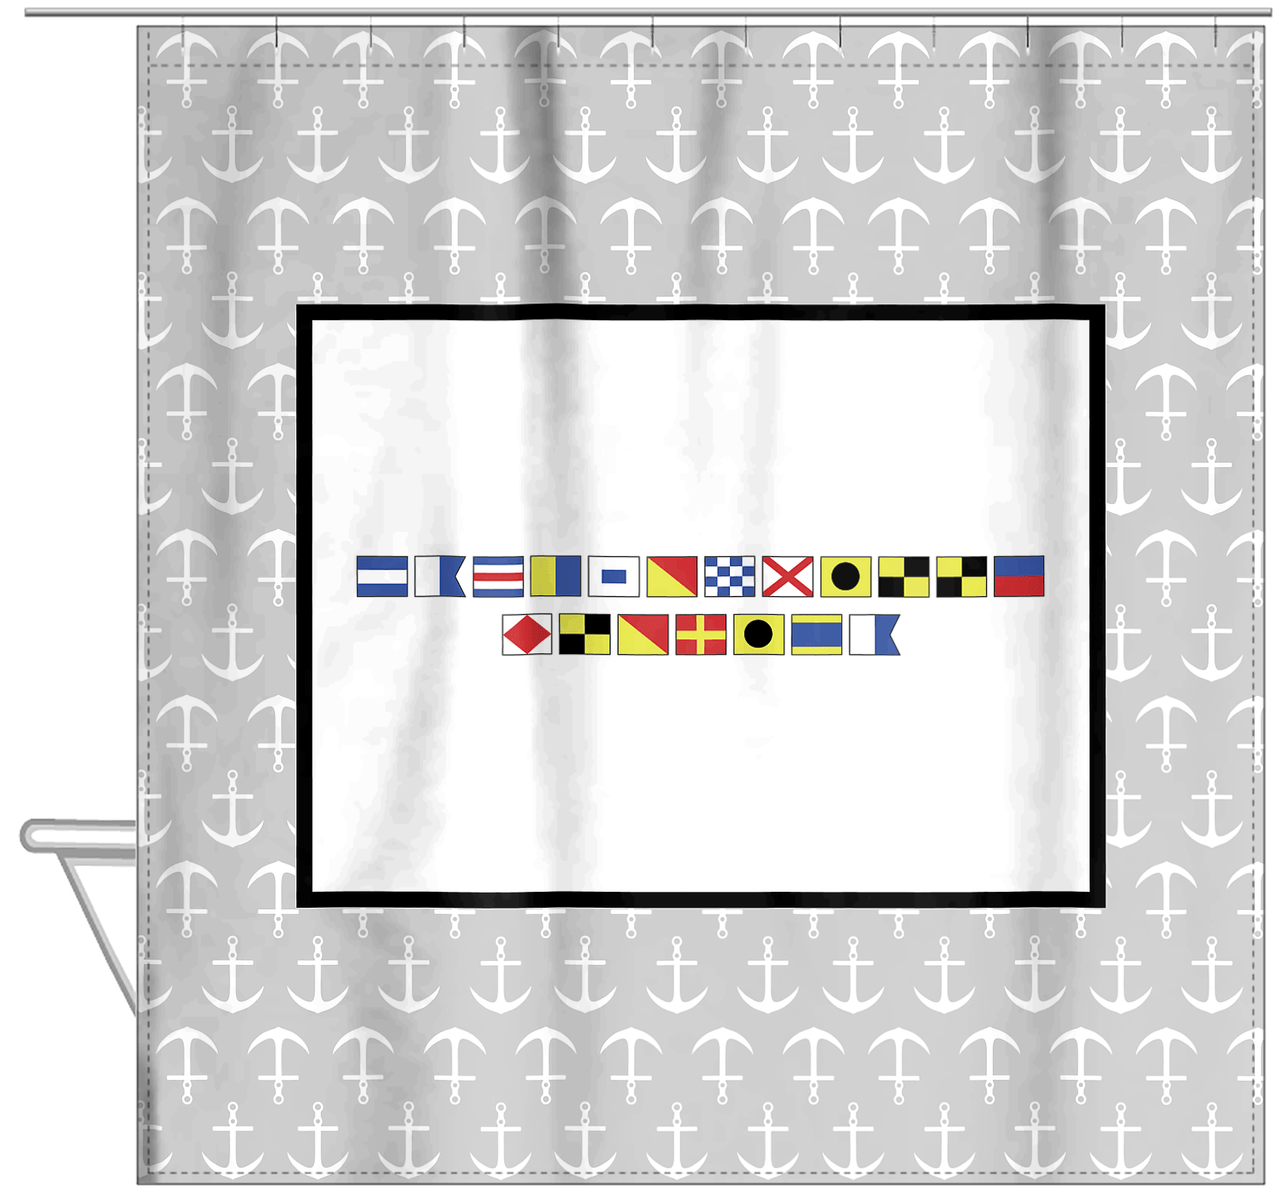 Personalized Nautical Flags Shower Curtain with Anchors - Grey and Black - Flags without Letters - Hanging View